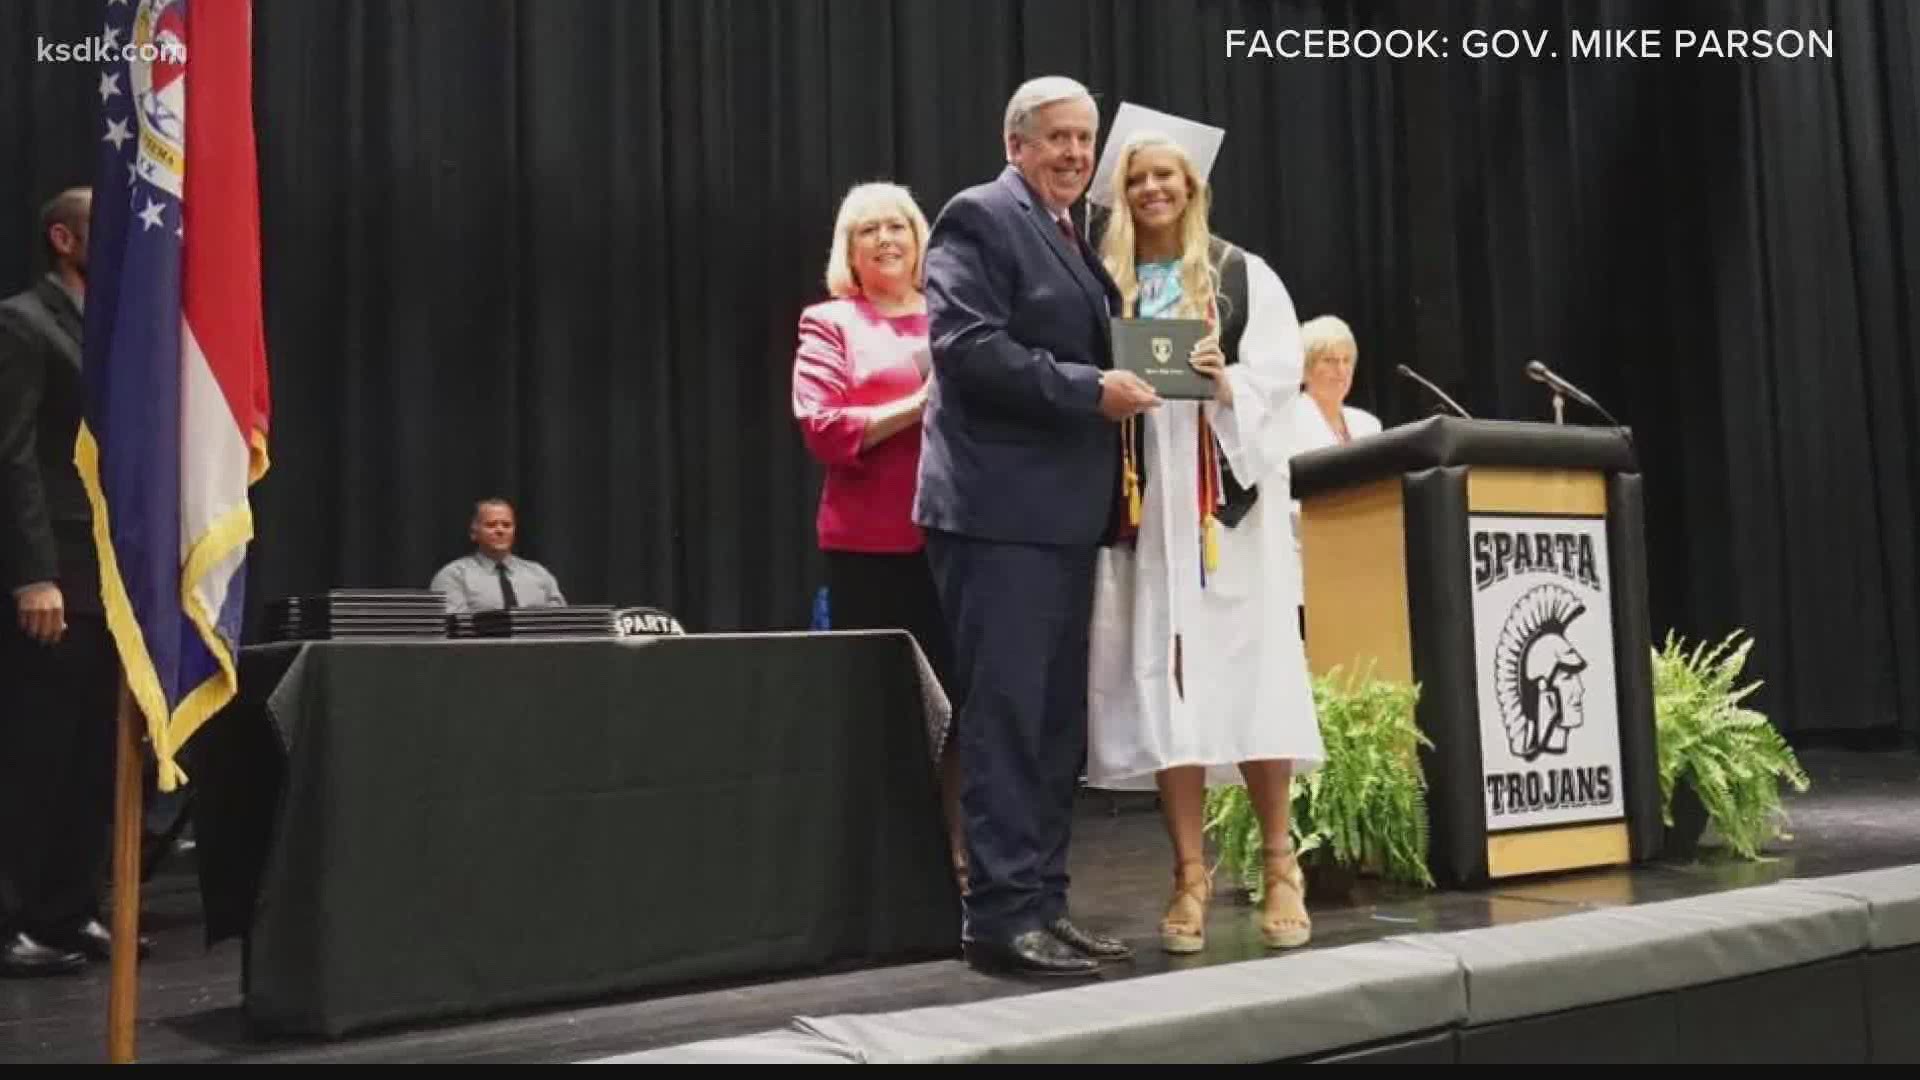 “Proud to be able to celebrate with my granddaughter as she graduated from Sparta High School tonight!” the governor wrote on his Facebook page